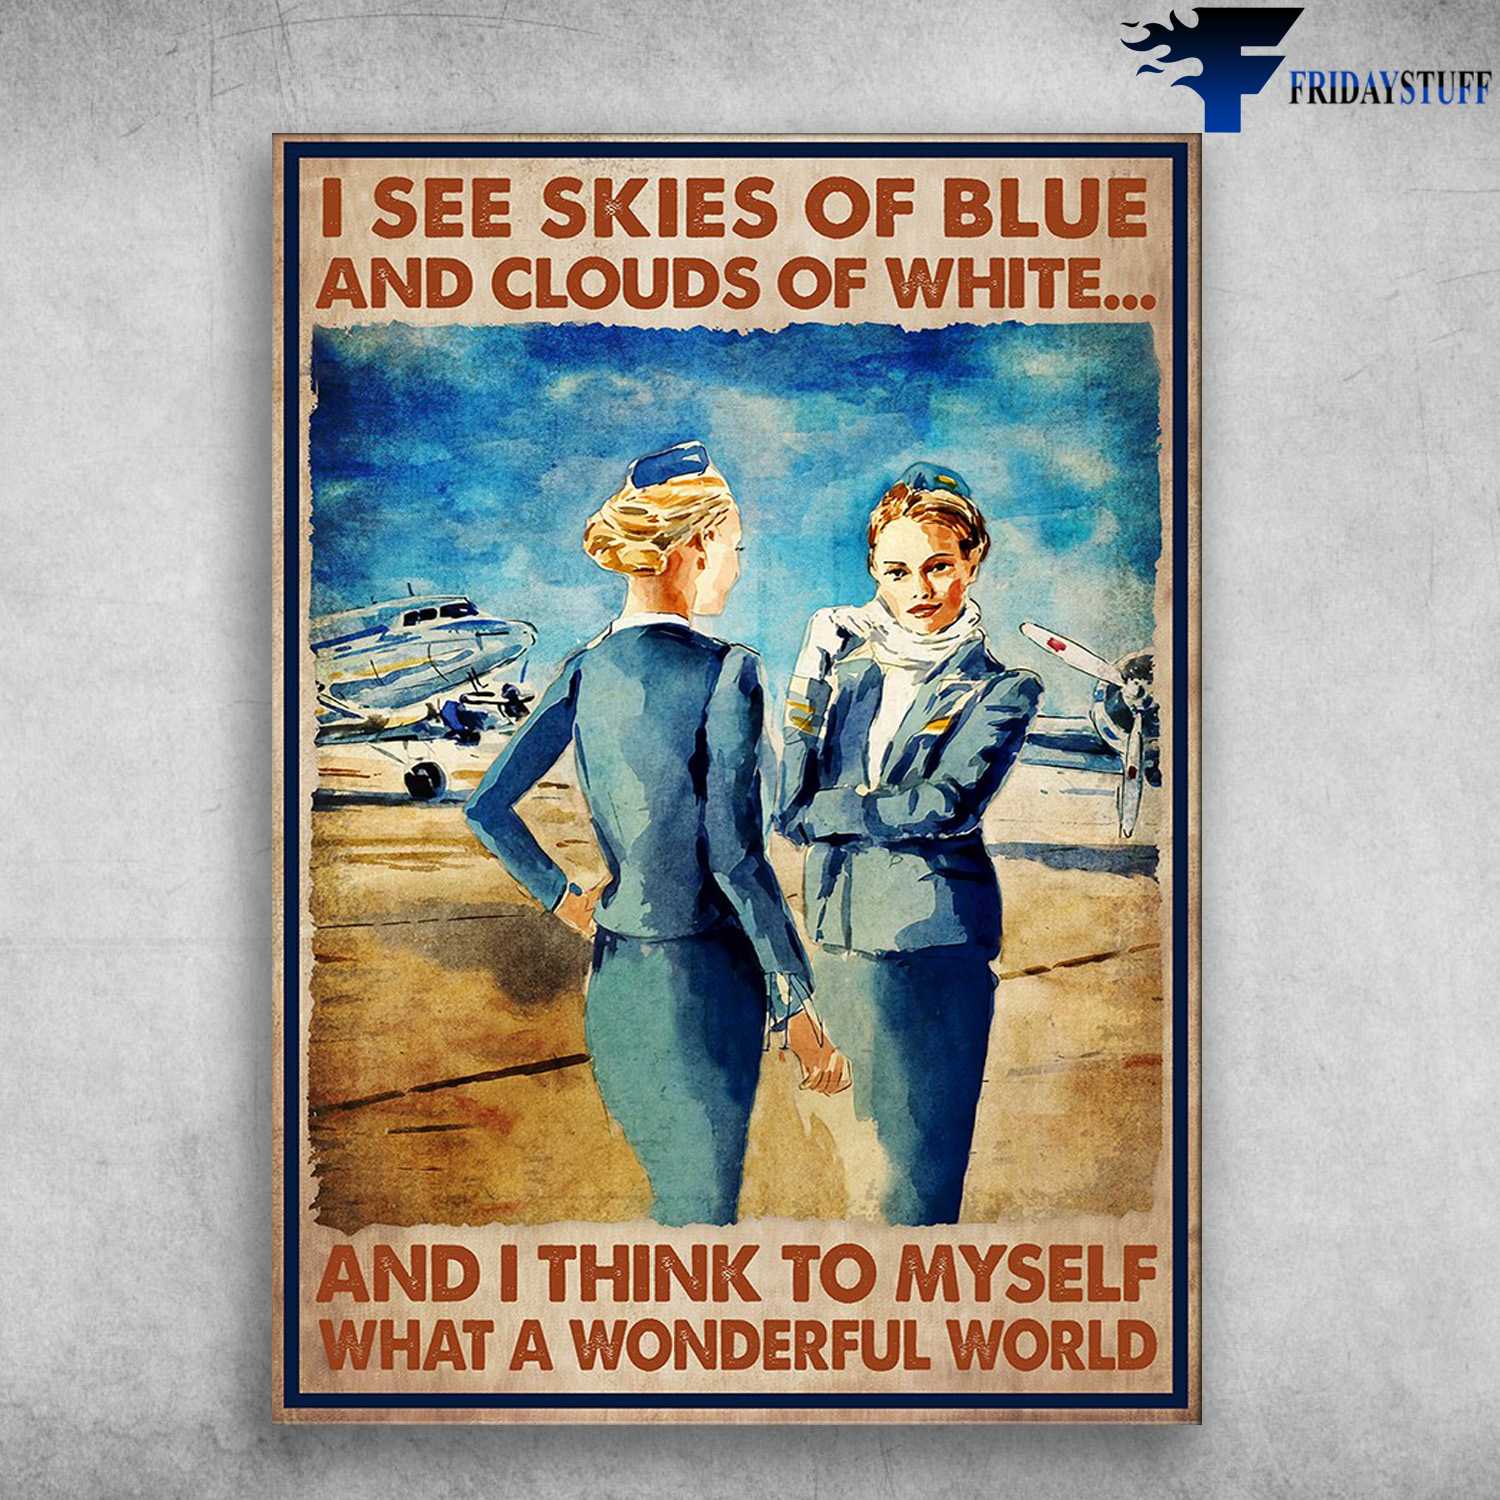 Flight Attendant - I See Skies Of Blue And Clouds Of White, And I Think To Myself, What A Wonderful World